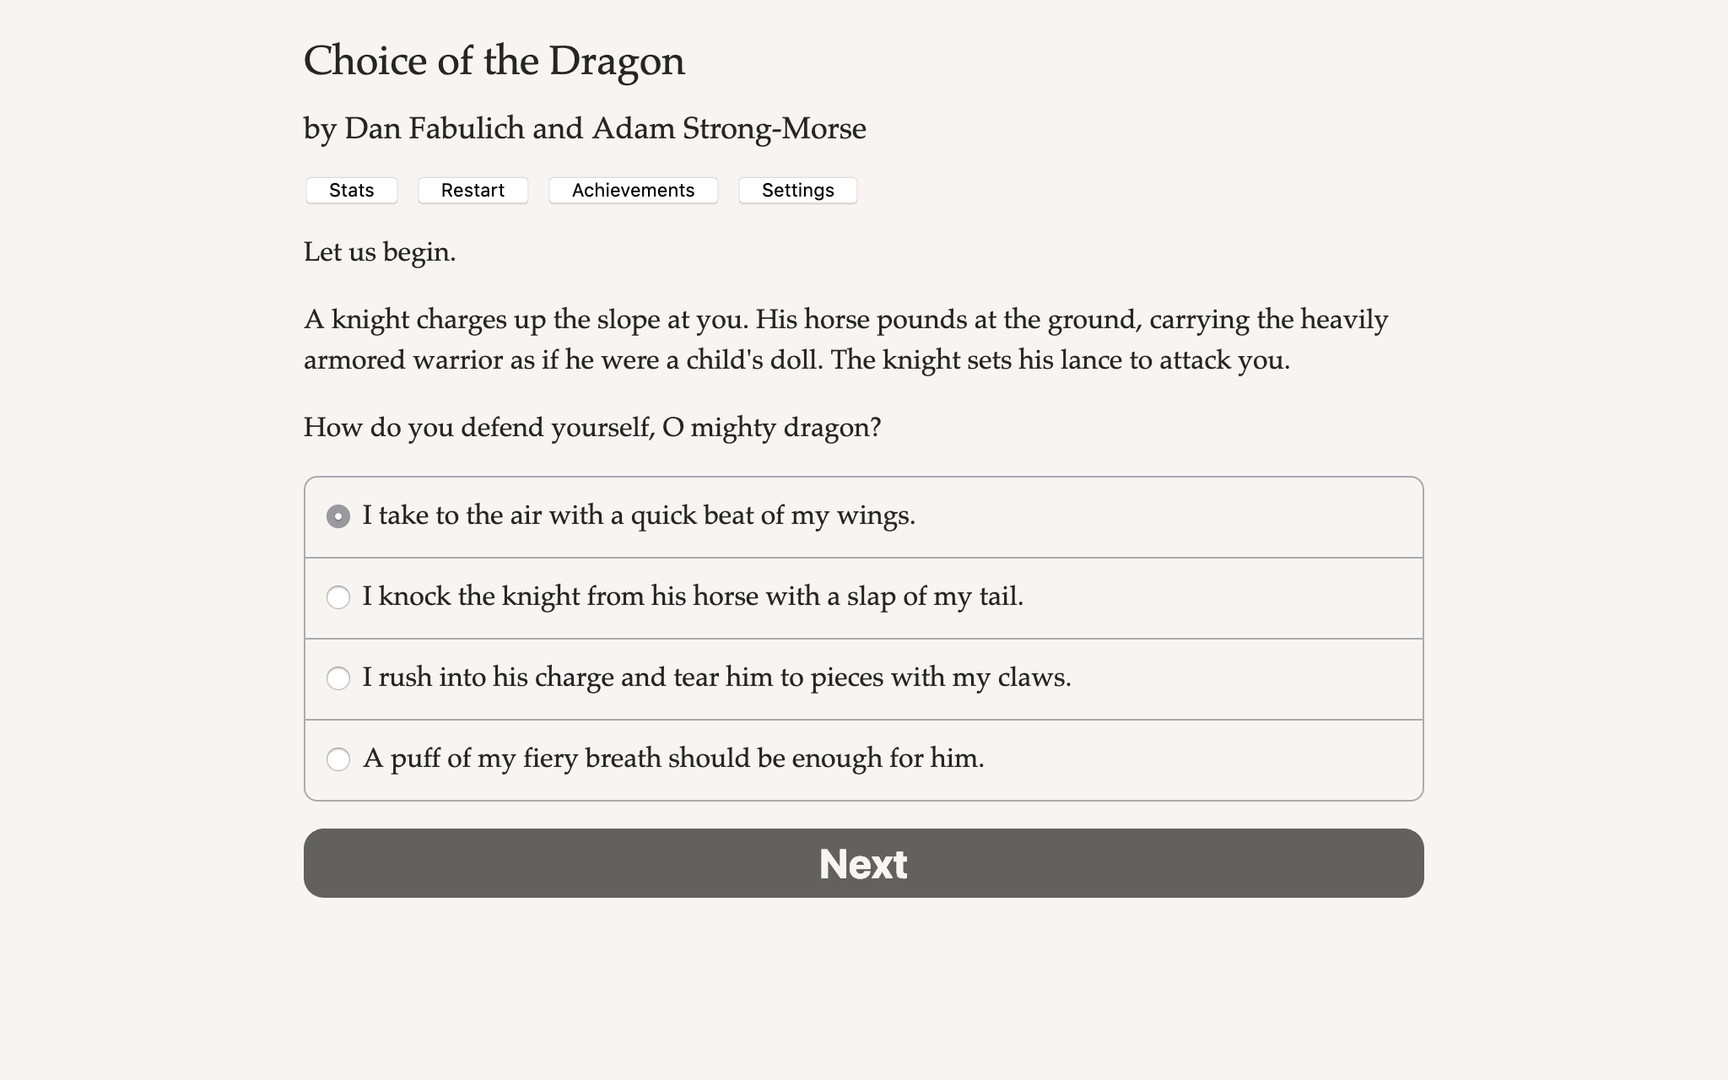 Choice of the Dragon Demo Featured Screenshot #1